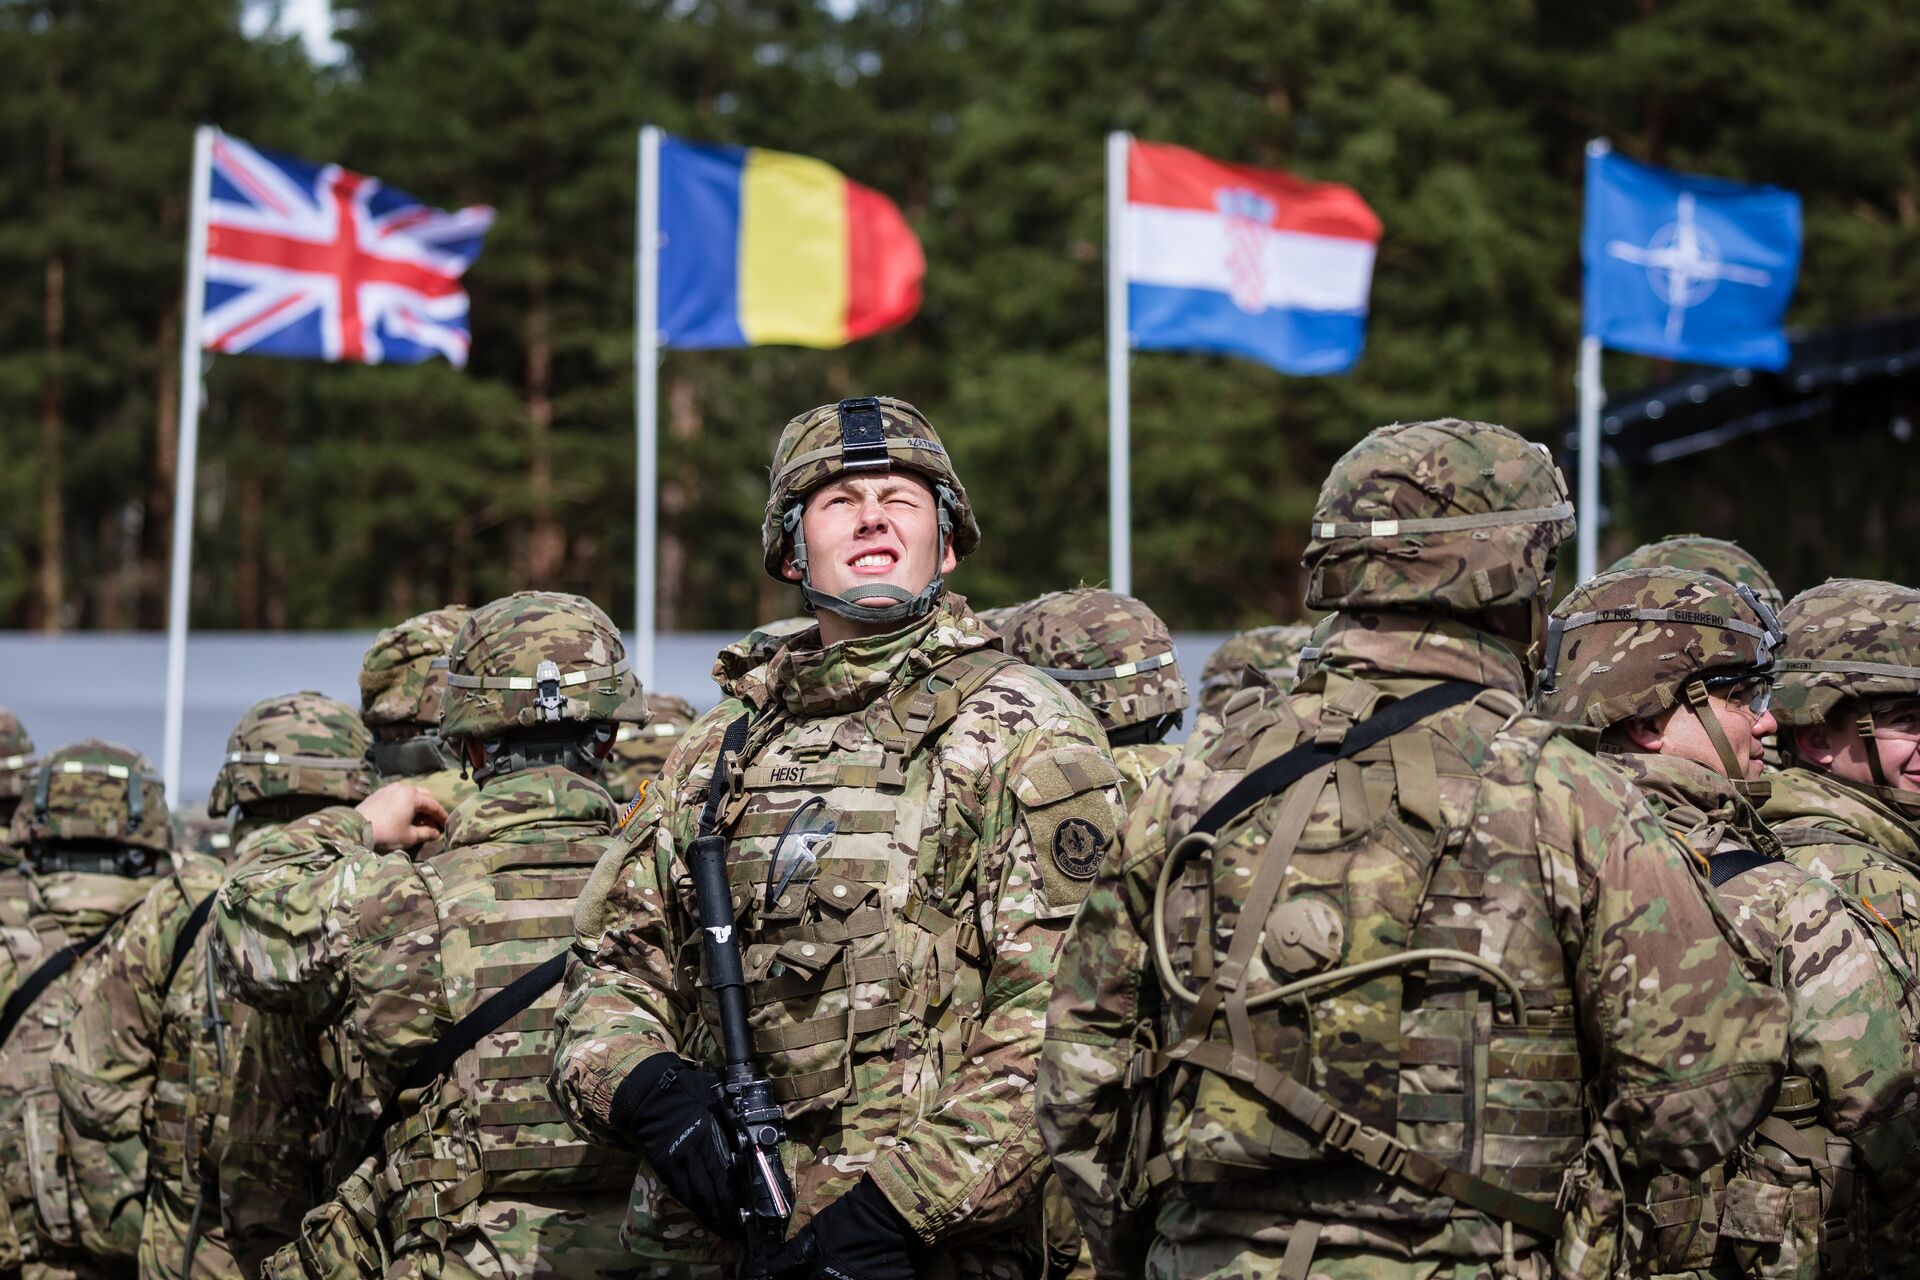 US soldiers are pictured prior the beginning of the official welcoming ceremony of NATO troops in Orzysz, Poland, on April 13, 2017. - Sputnik International, 1920, 21.01.2022